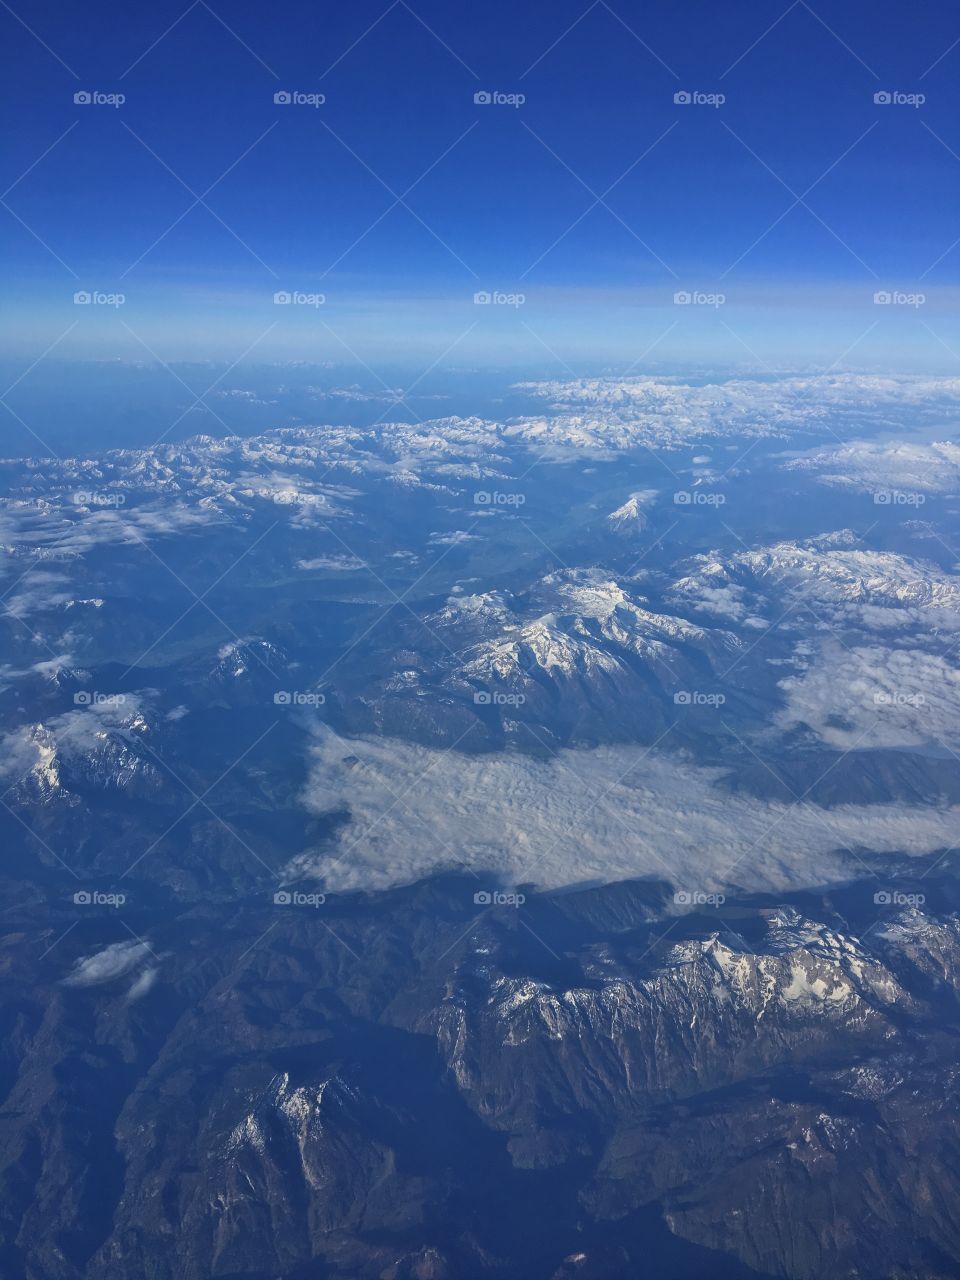 Mountains from an airplane shot with iPhone 6s